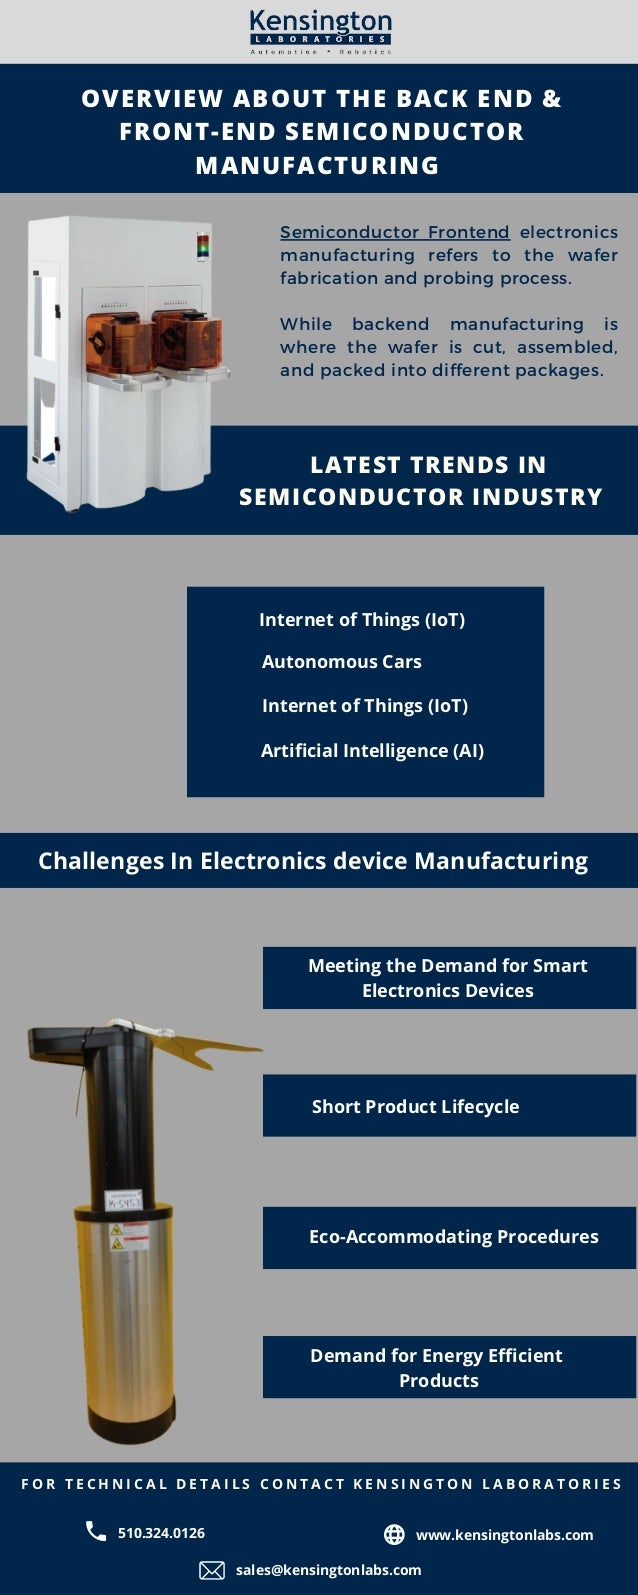 F O R T E C H N I C A L D E T A I L S C O N T A C T K E N S I N G T O N L A B O R A T O R I E S
OVERVIEW ABOUT THE BACK END &
FRONT-END SEMICONDUCTOR
MANUFACTURING


LATEST TRENDS IN
SEMICONDUCTOR INDUSTRY


Semiconductor Frontend electronics
manufacturing refers to the wafer
fabrication and probing process.
While backend manufacturing is
where the wafer is cut, assembled,
and packed into different packages.
Internet of Things (IoT)
Internet of Things (IoT)
Autonomous Cars
Artificial Intelligence (AI)
Challenges In Electronics device Manufacturing
Meeting the Demand for Smart
Electronics Devices
Short Product Lifecycle
Eco-Accommodating Procedures
Demand for Energy Efficient
Products
www.kensingtonlabs.com
510.324.0126
sales@kensingtonlabs.com
 